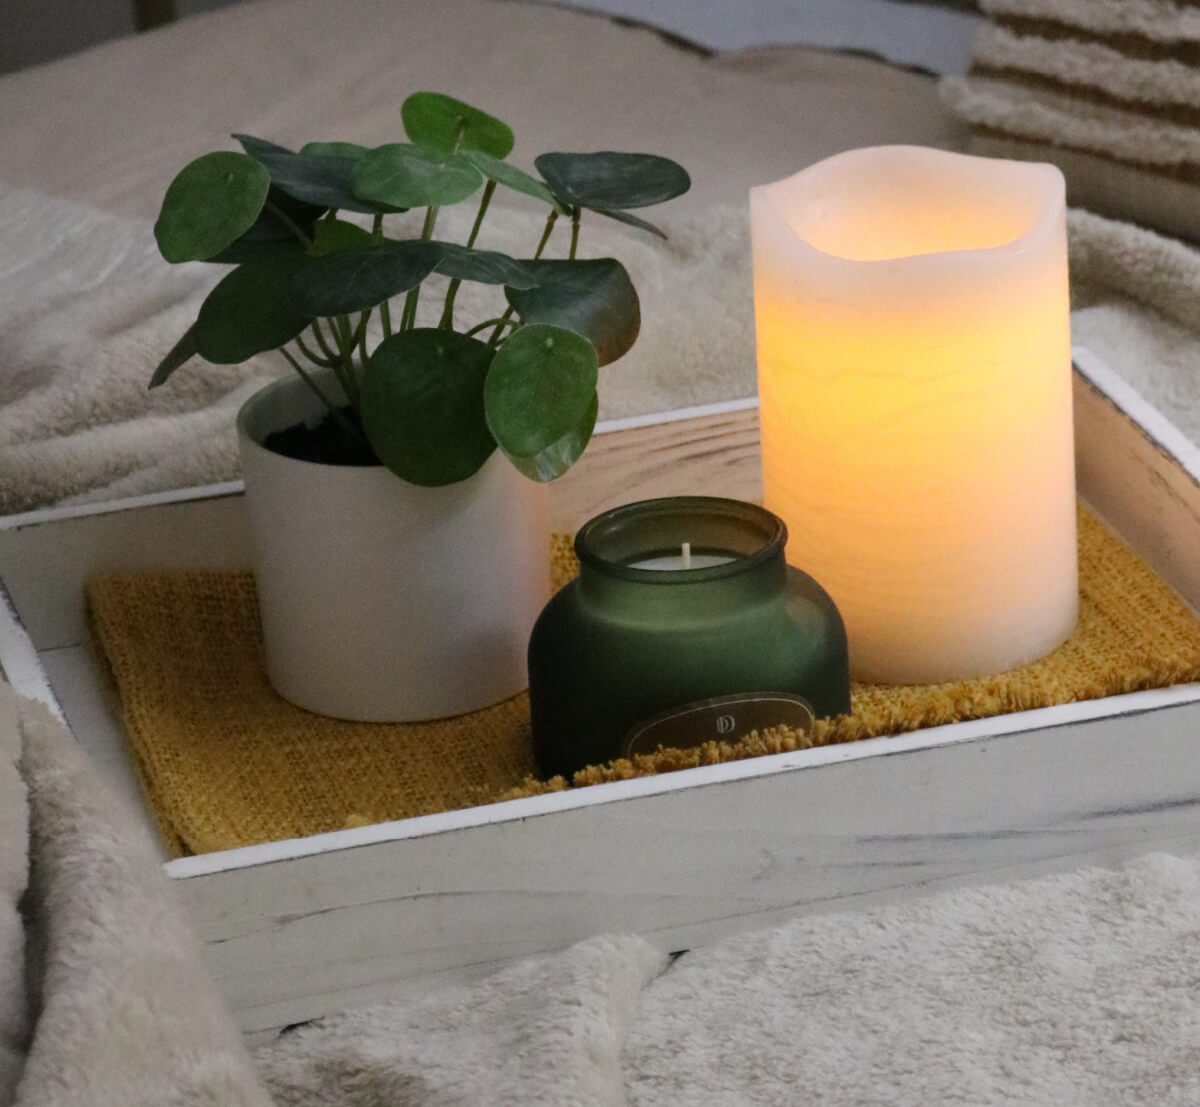 A wood tray with candles and a plant